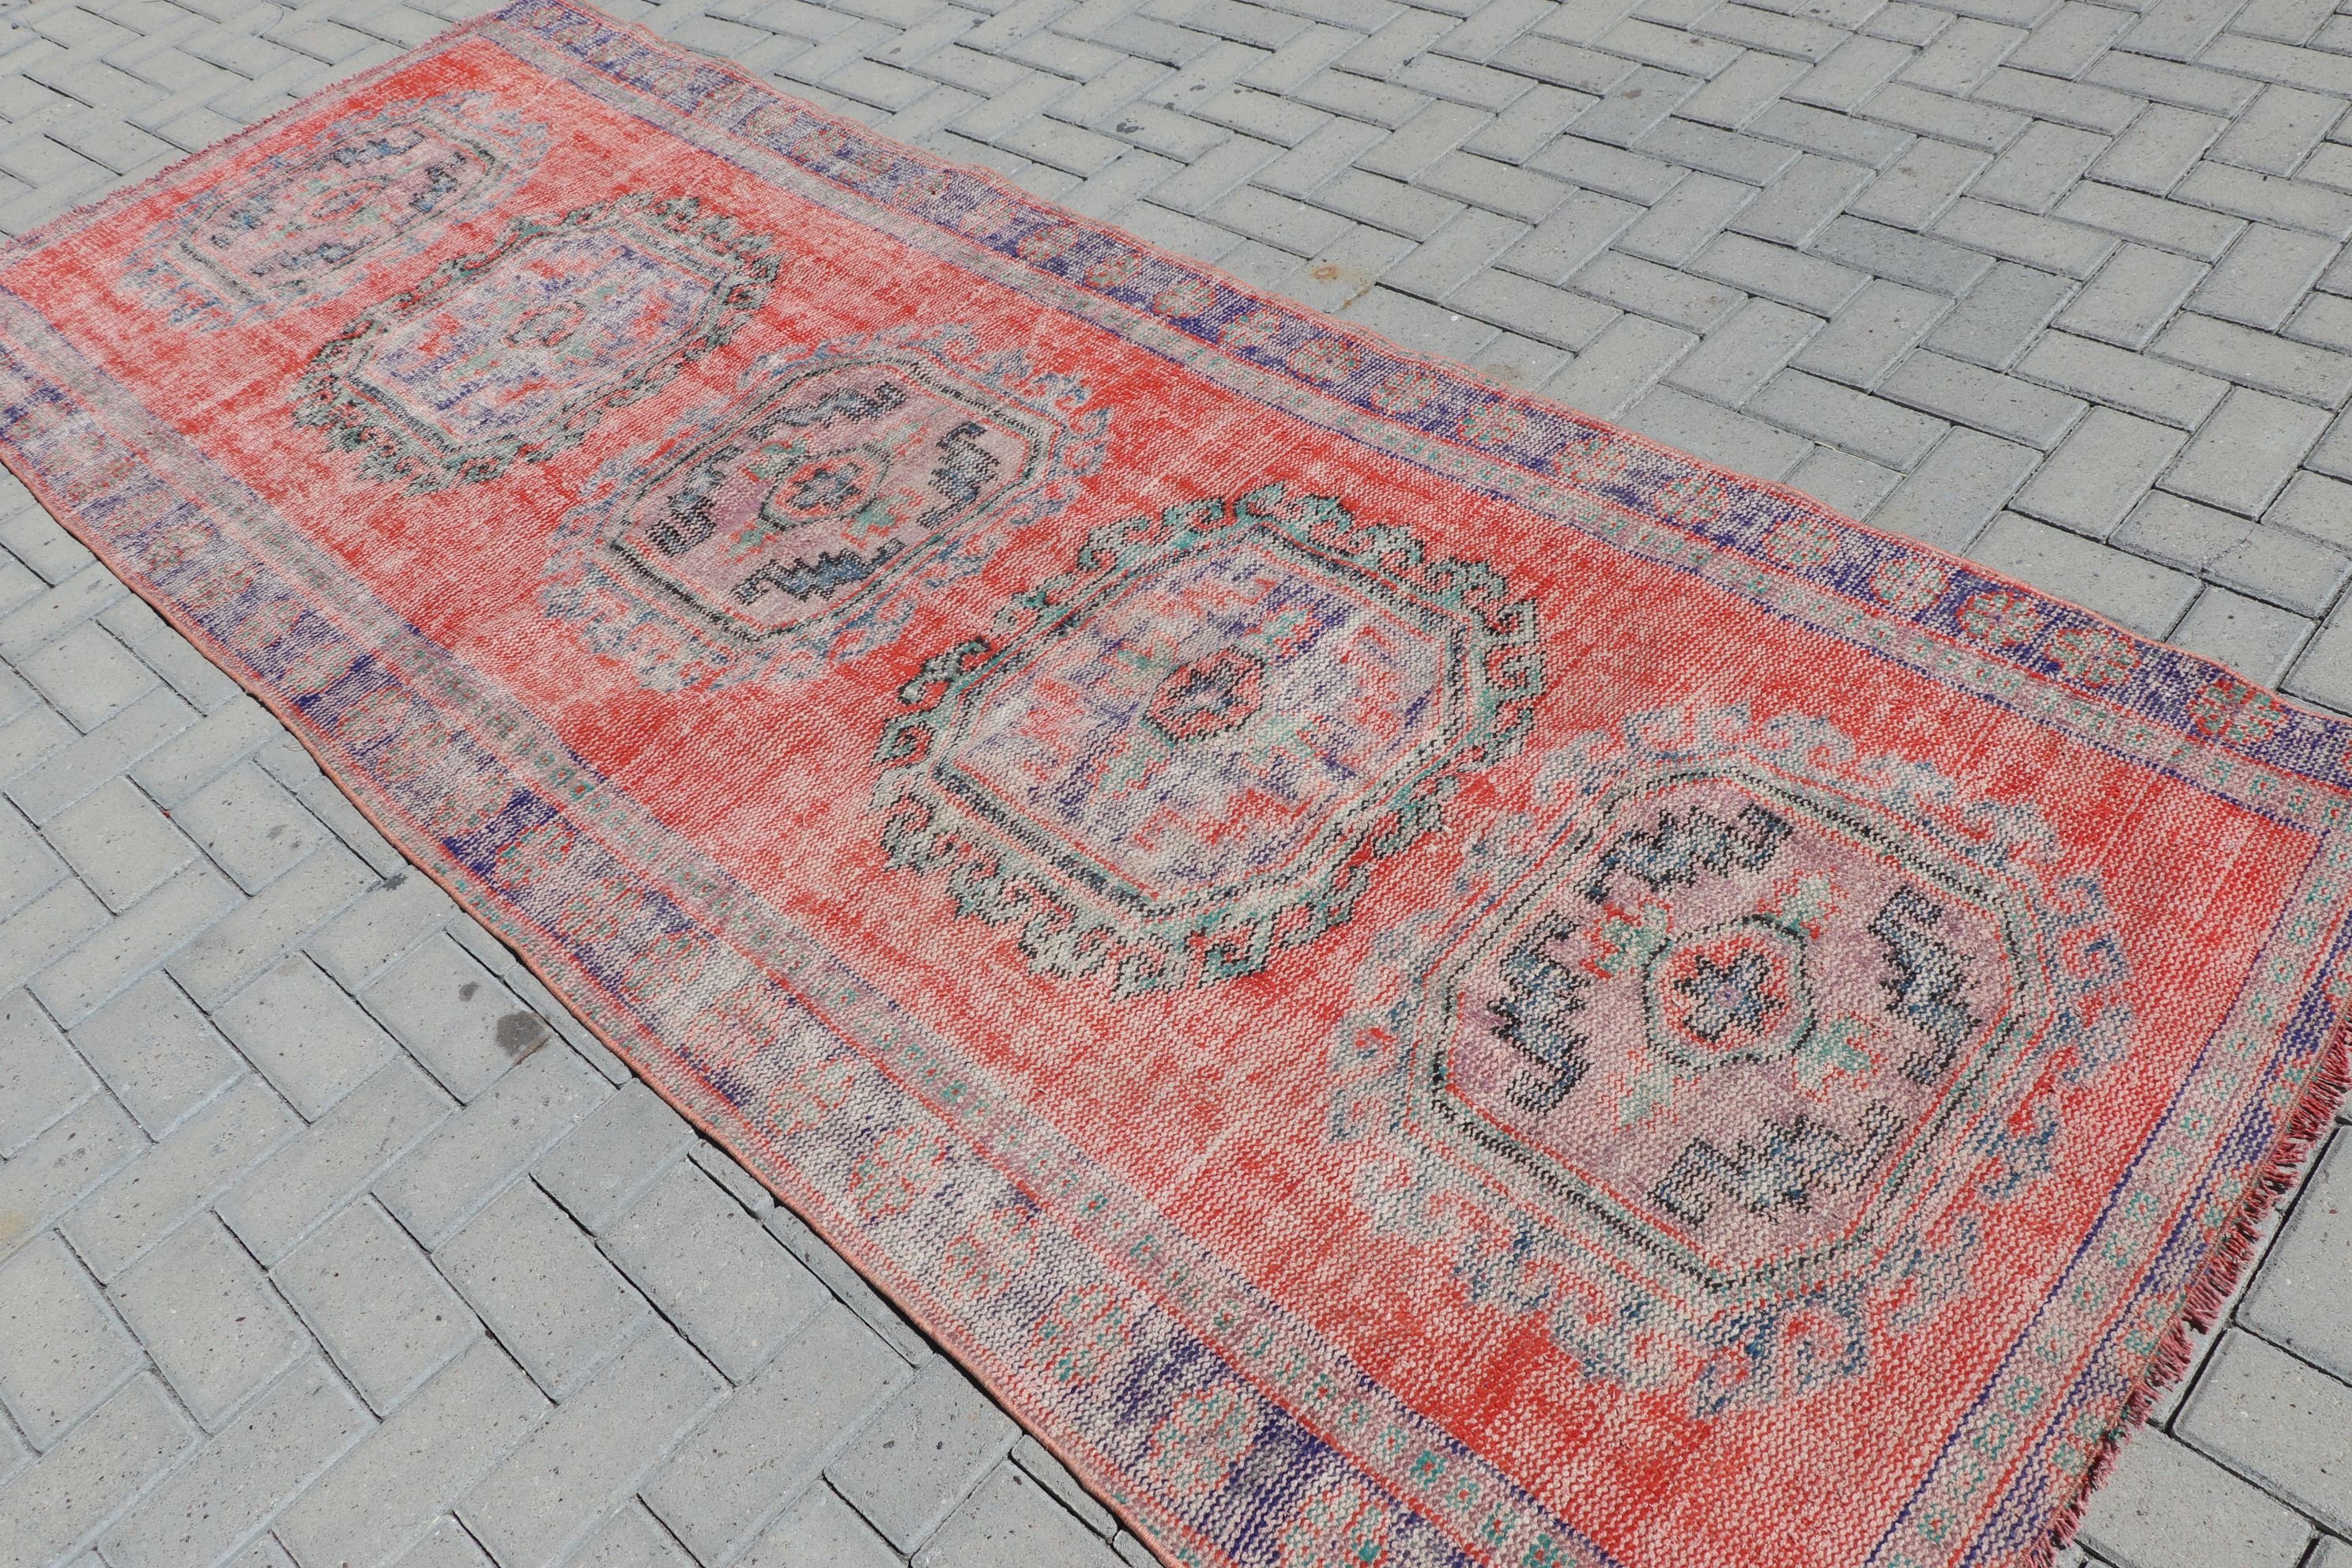 Anatolian Rugs, 4x10.6 ft Runner Rug, Red Cool Rug, Turkish Rugs, Antique Rug, Kitchen Rug, Rugs for Hallway, Vintage Rug, Hand Knotted Rug